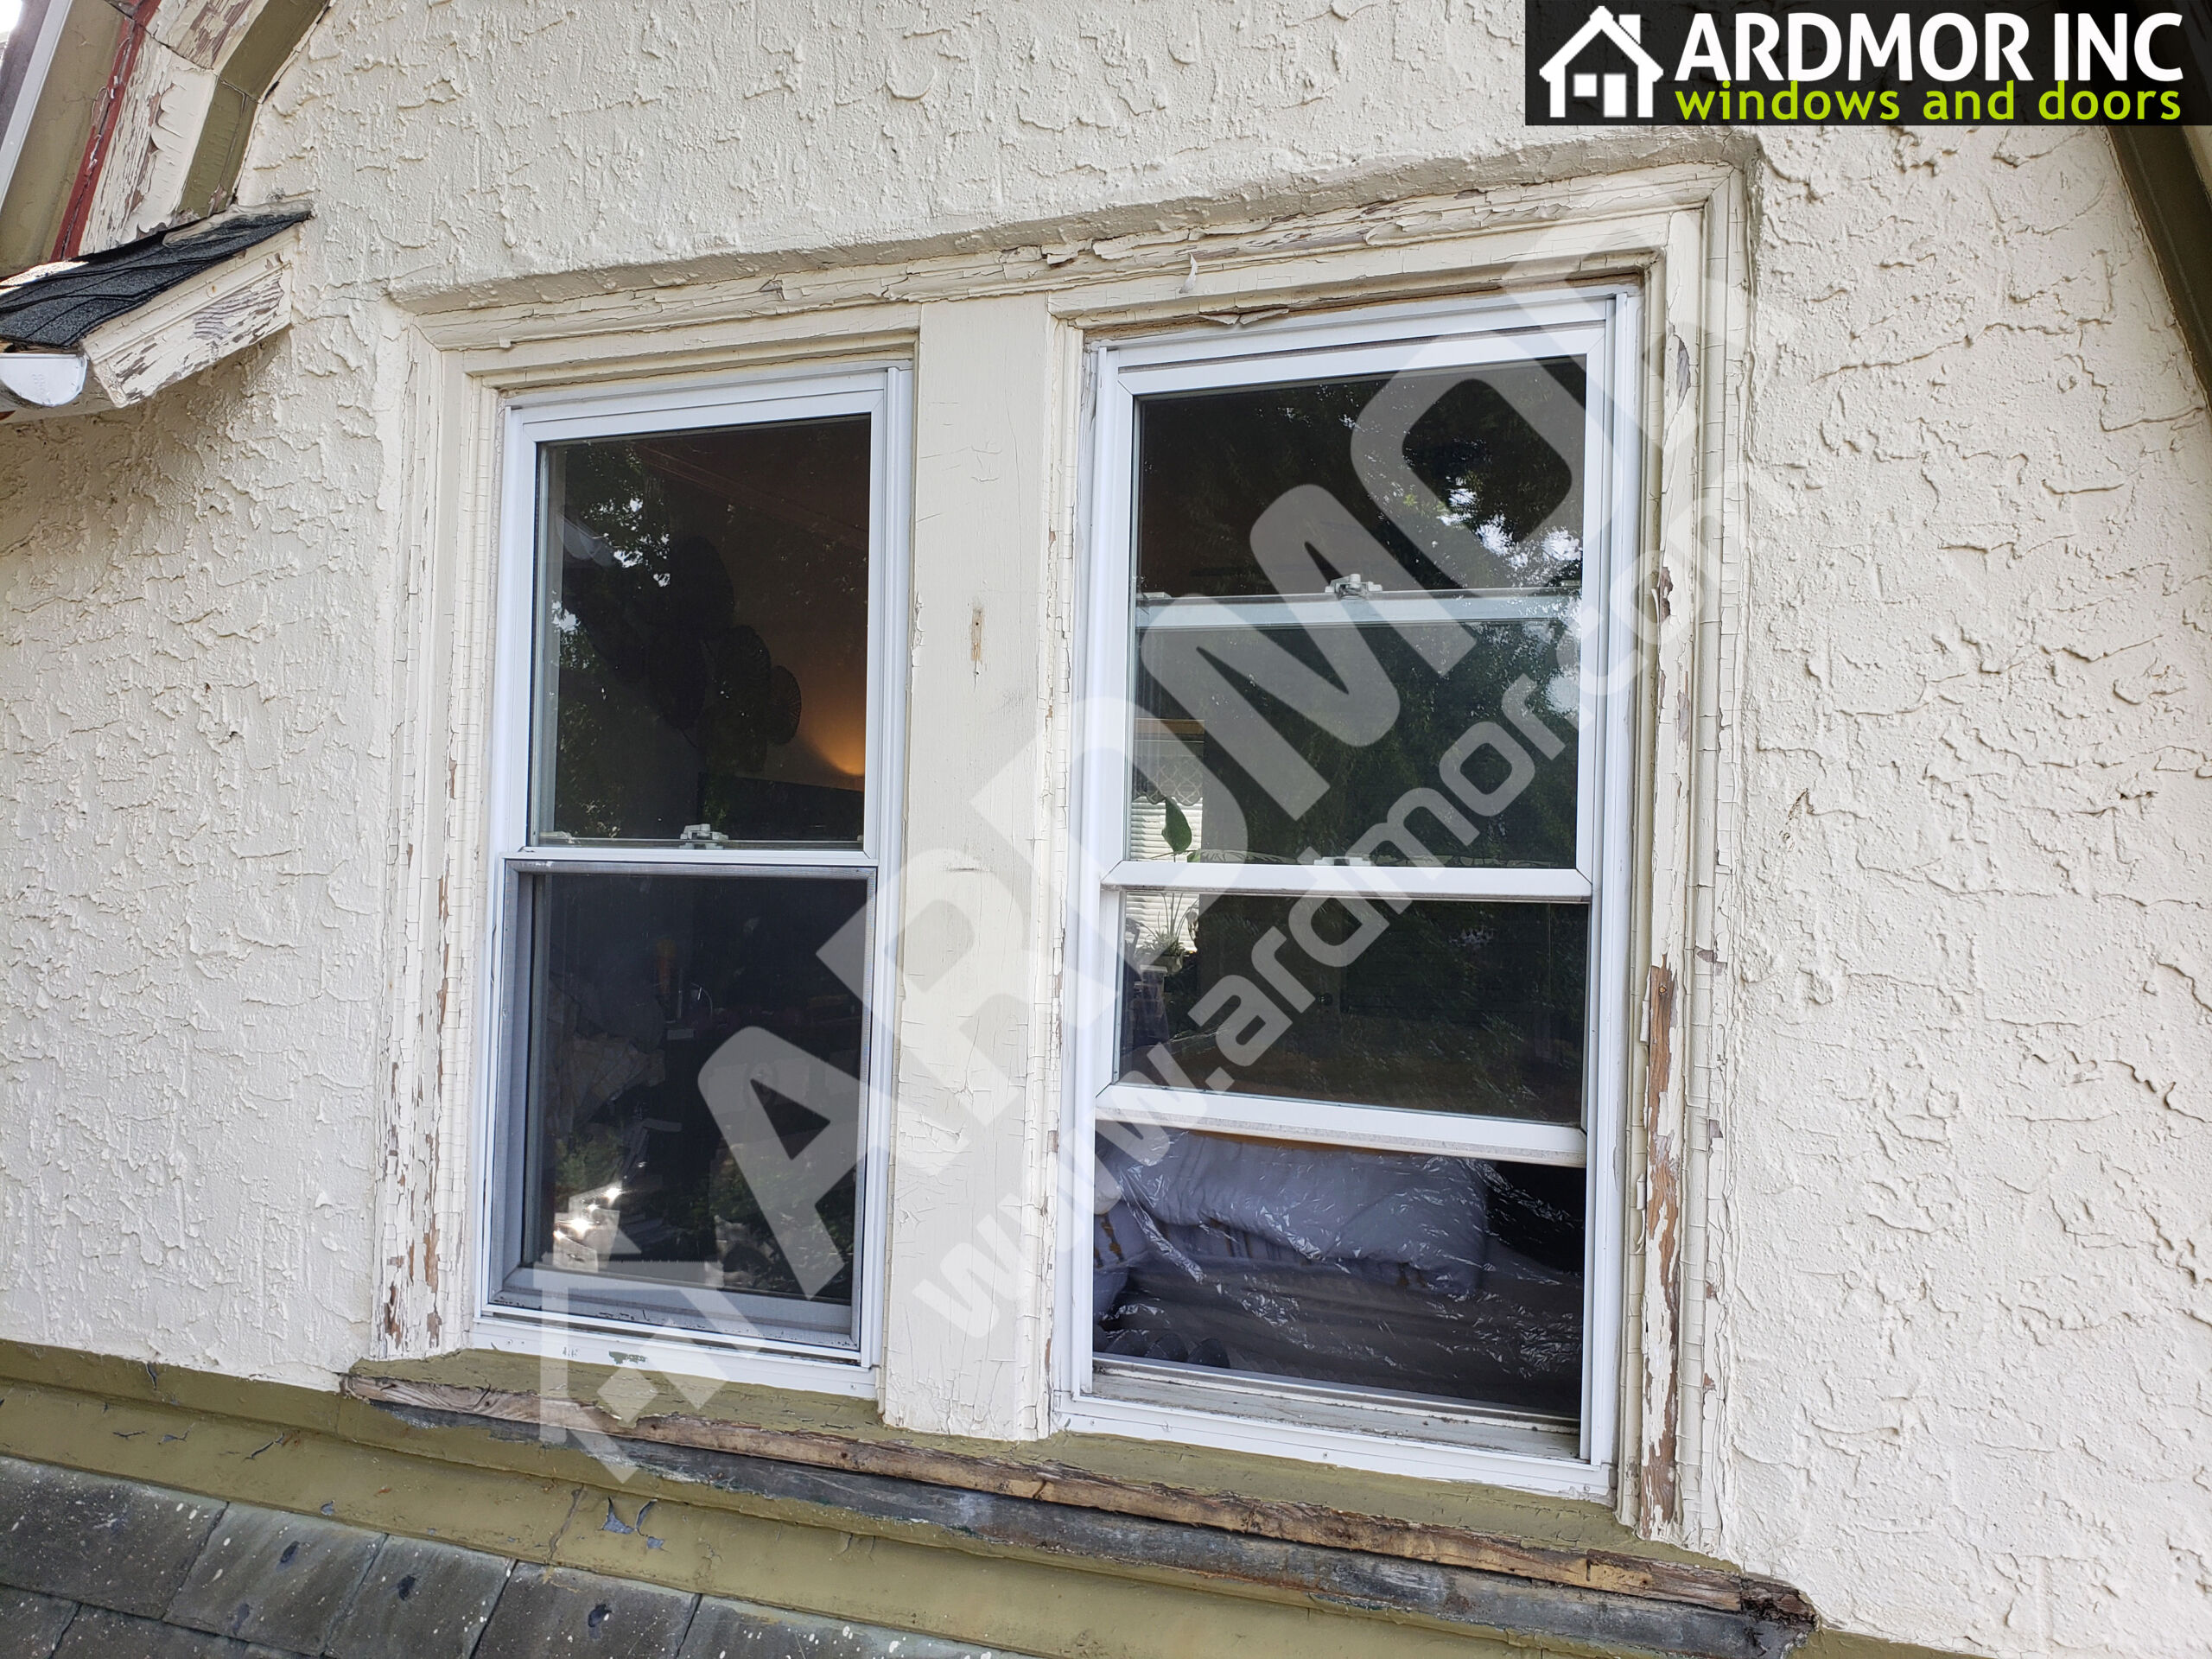 Black_Color_Vinyl_Double_Hung_Window_Installation_in_Philadelphia_PA_Before